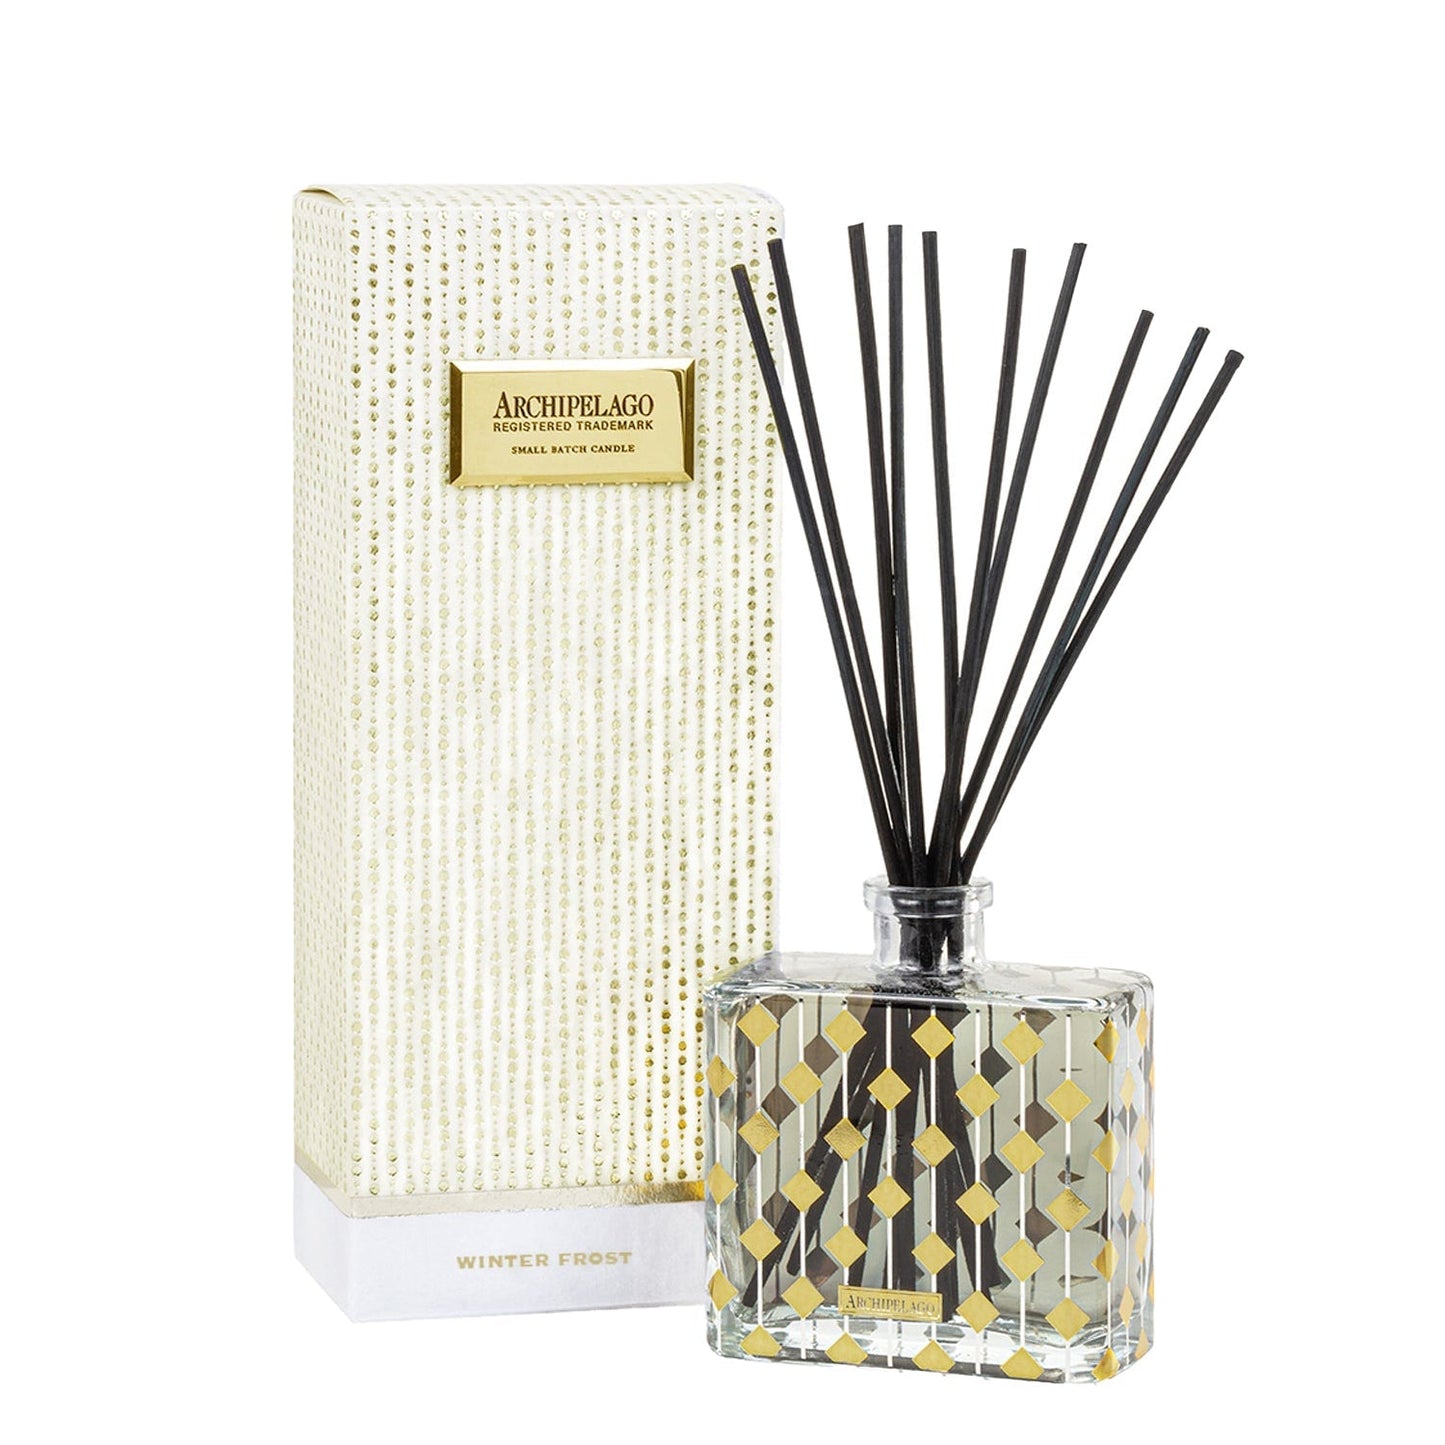 Winter Frost Holiday Diffuser